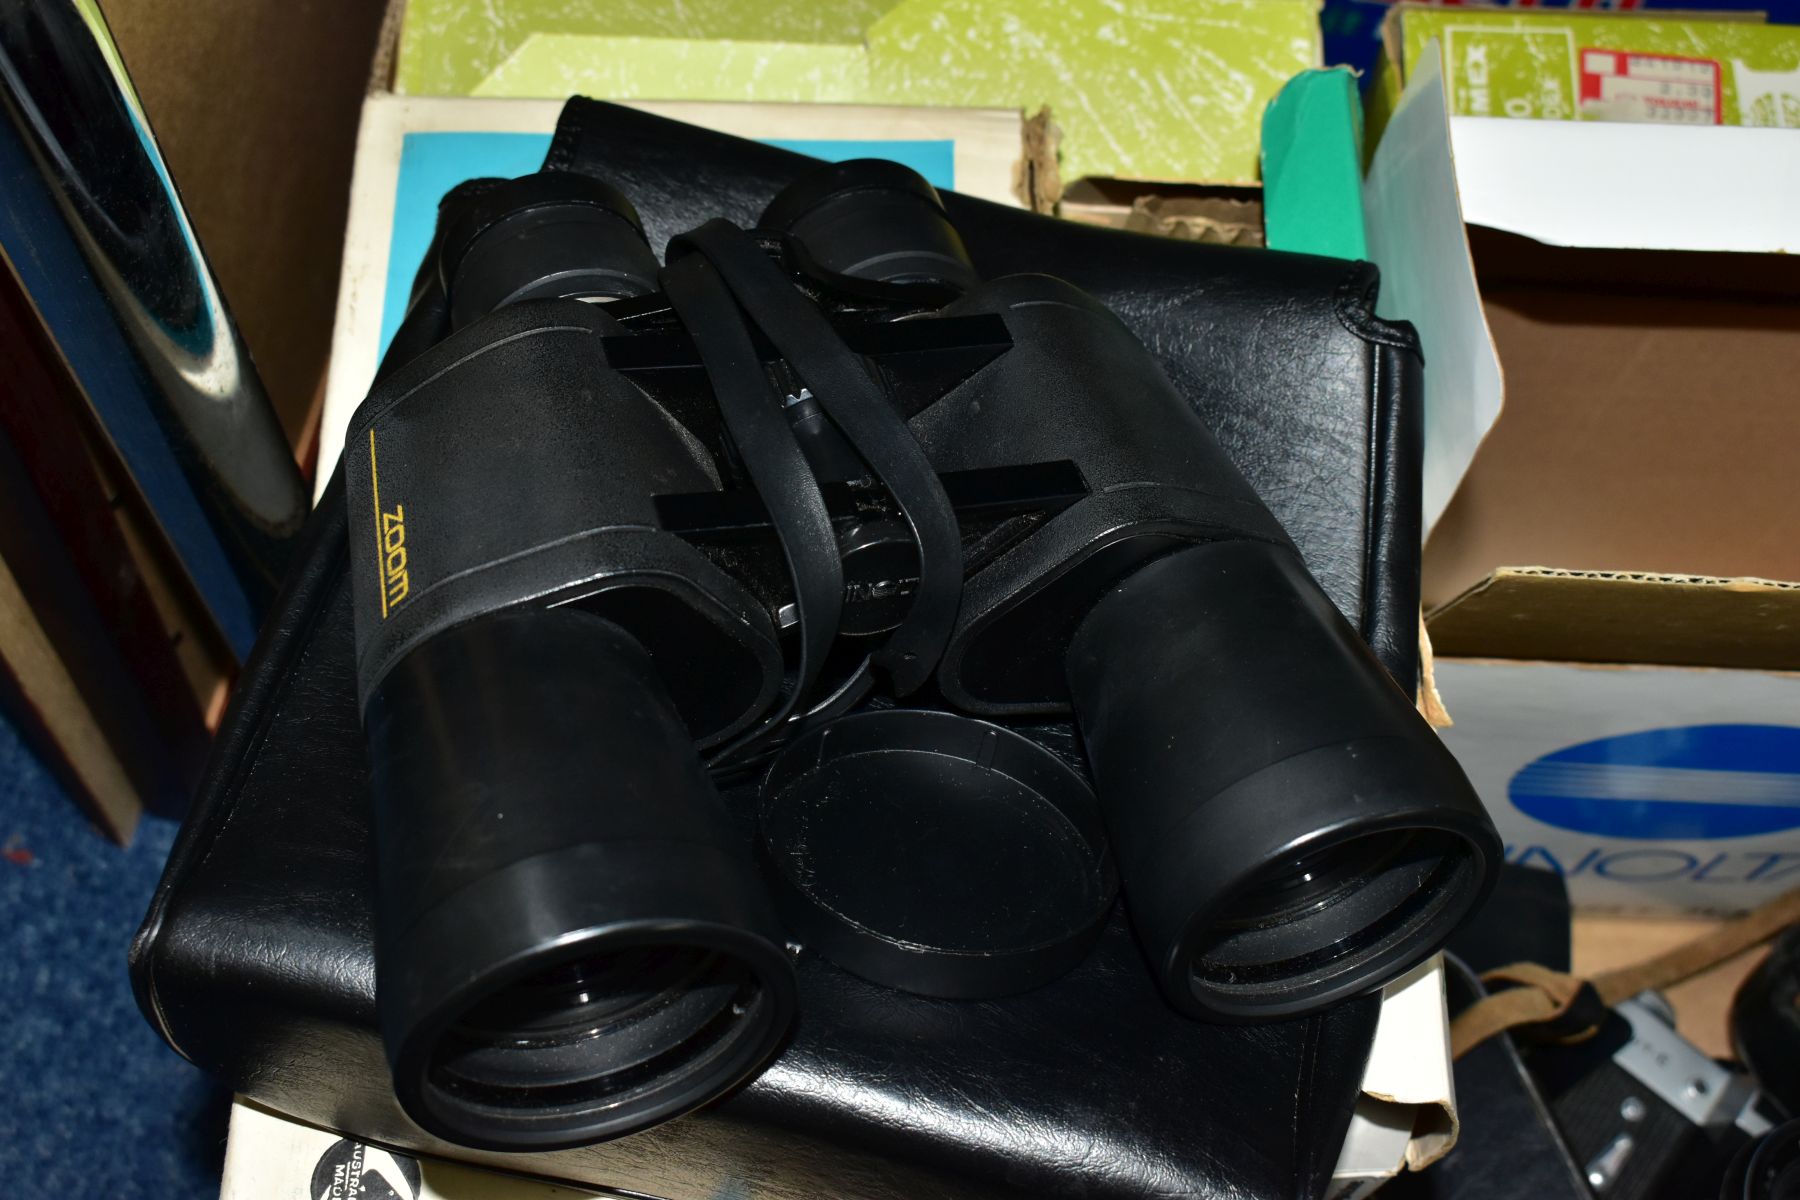 TWO BOXES AND LOOSE SUNDRY ITEMS, to include Zenit - E camera, boxed Minolta standard binoculars - Image 2 of 8